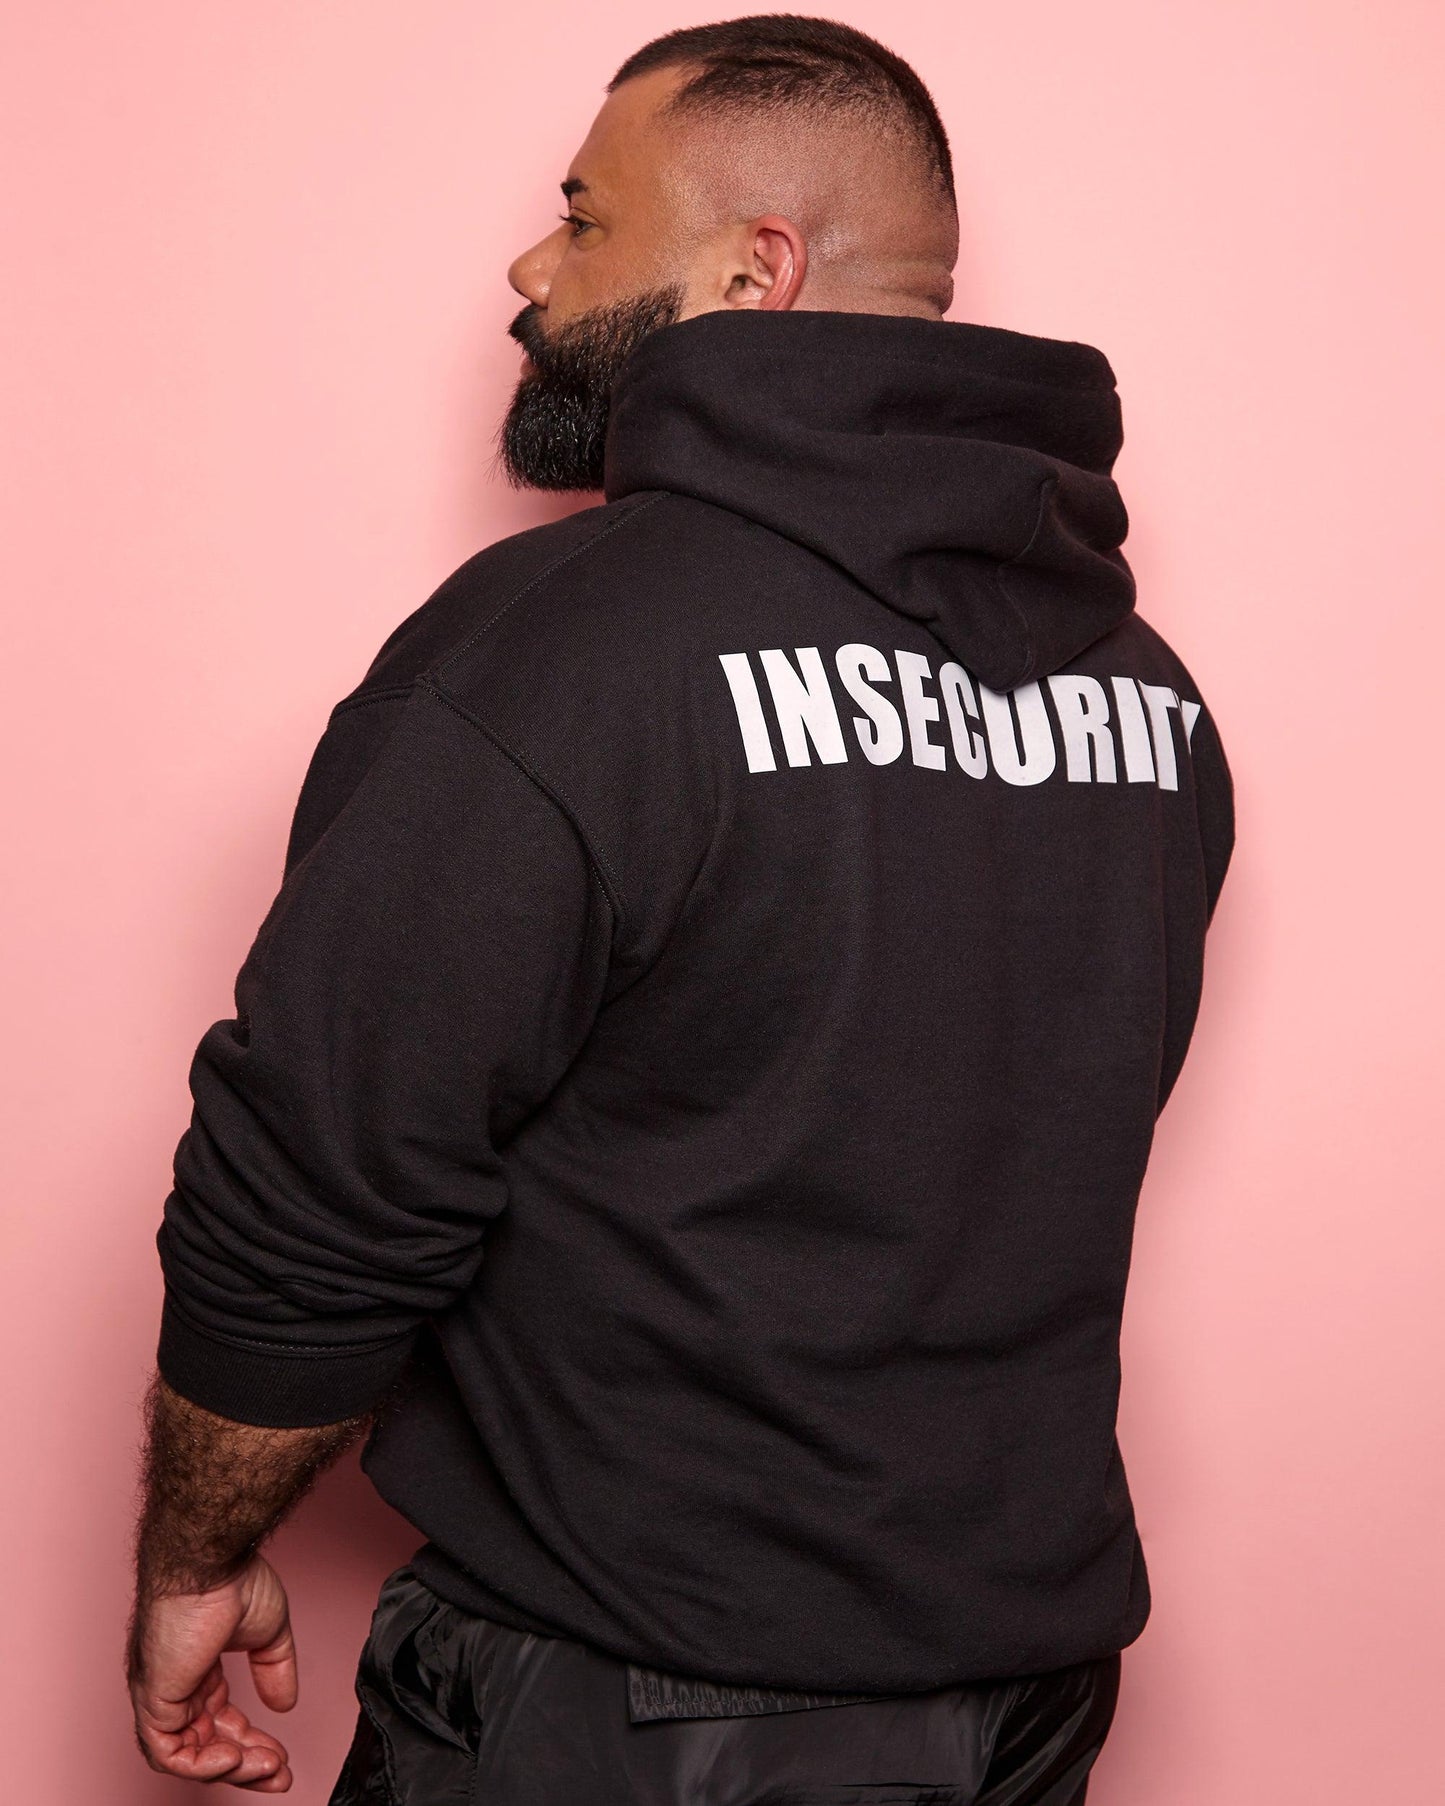 INSECURITY, white on black - pullover hoodie.